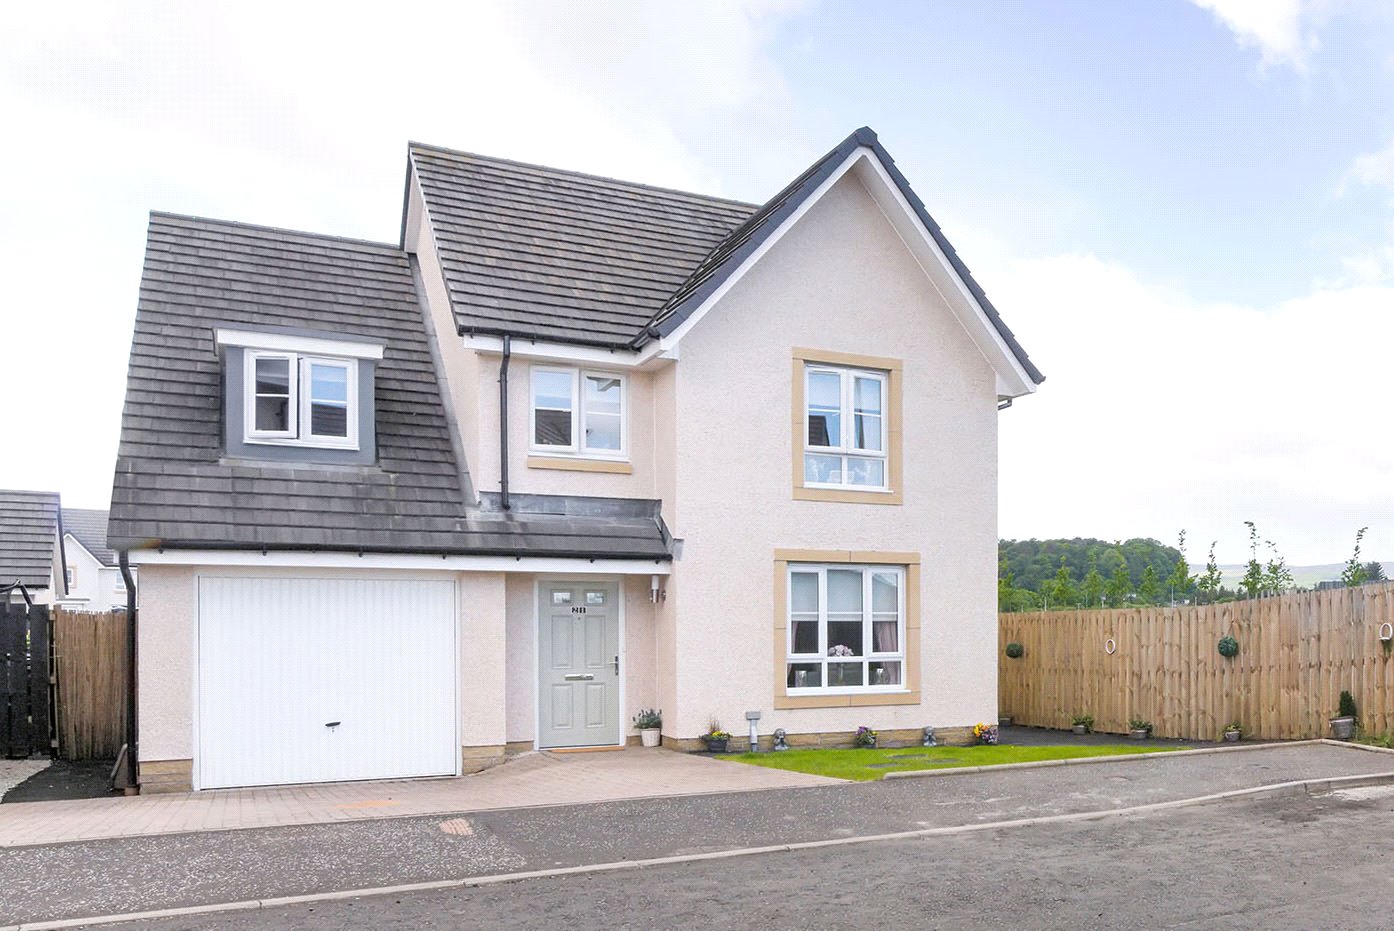 Stirling Property of the Week (11th June 2022)